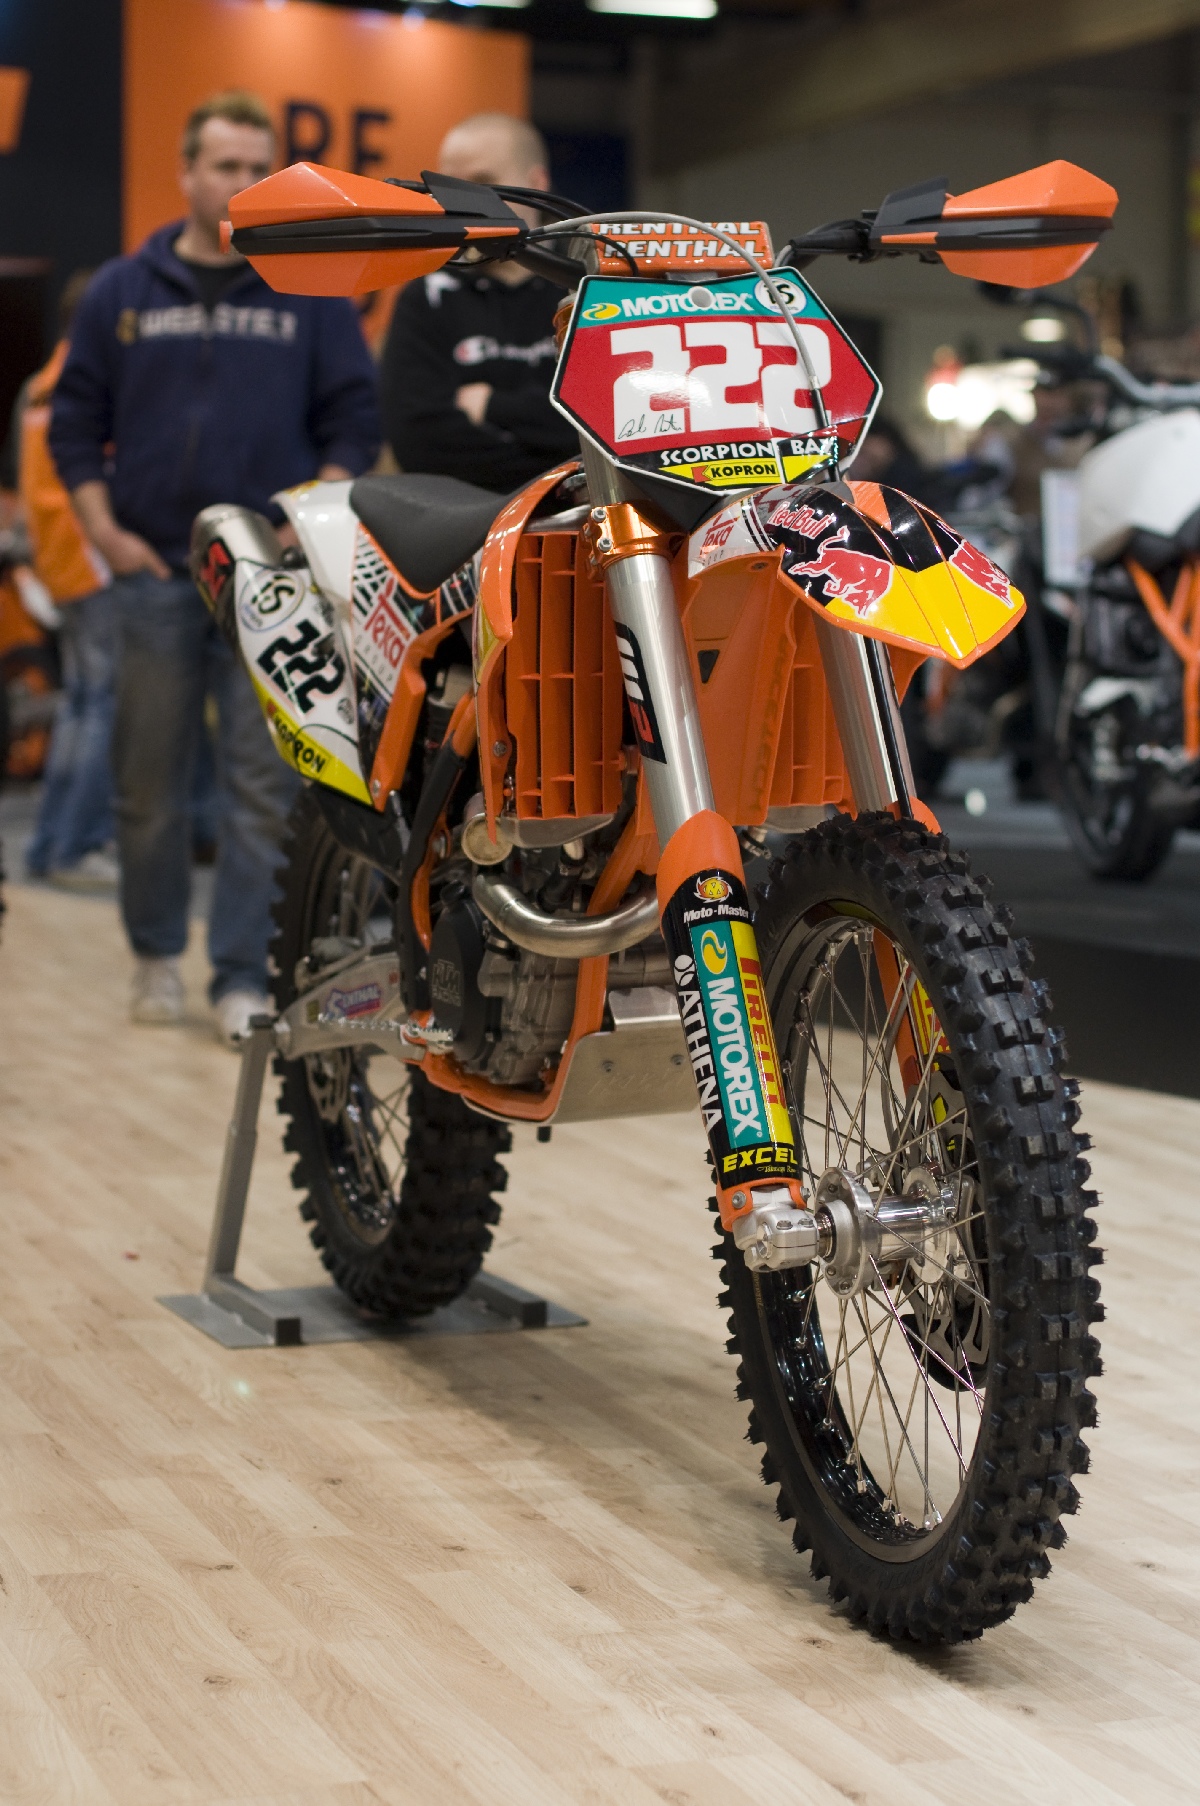 KTM 350 SX-F. MP 12 Motorcycle Show.